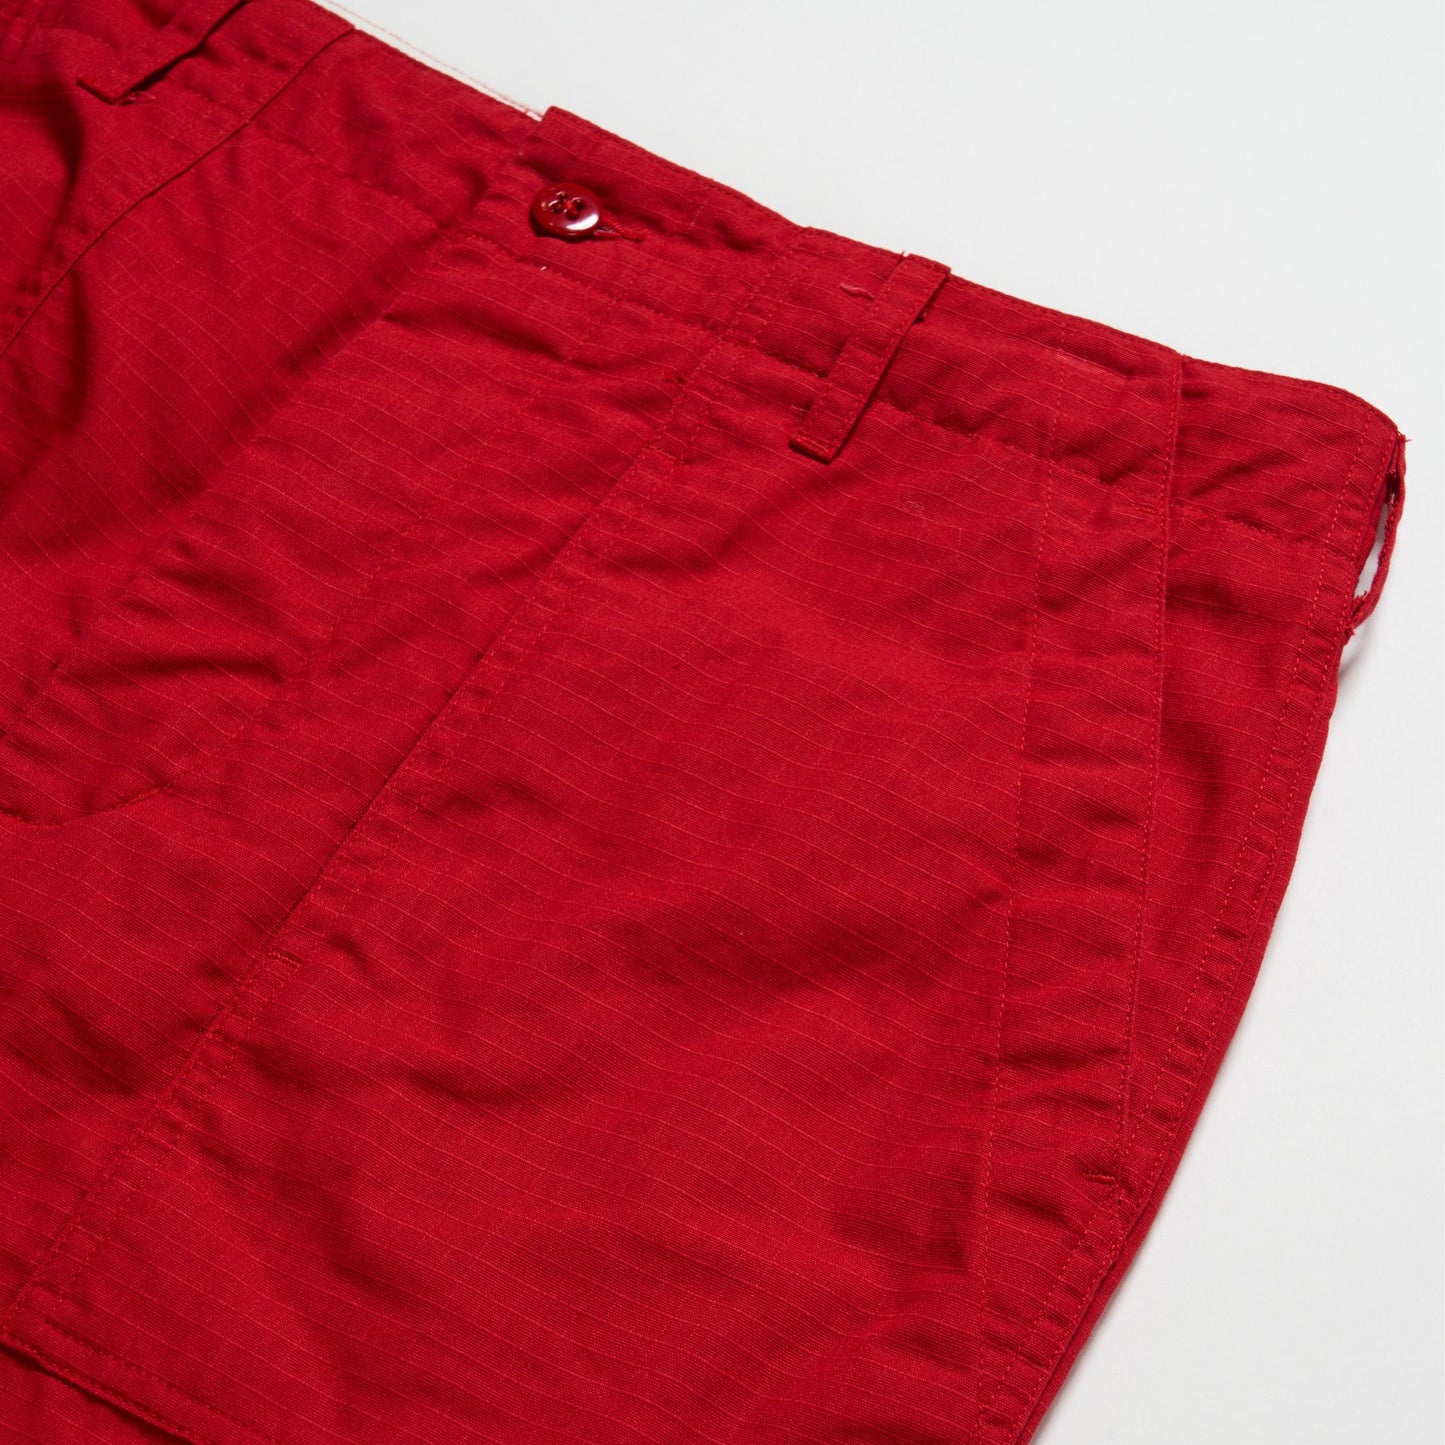 ENGINEERED GARMENTS - Fatigue Pant Red